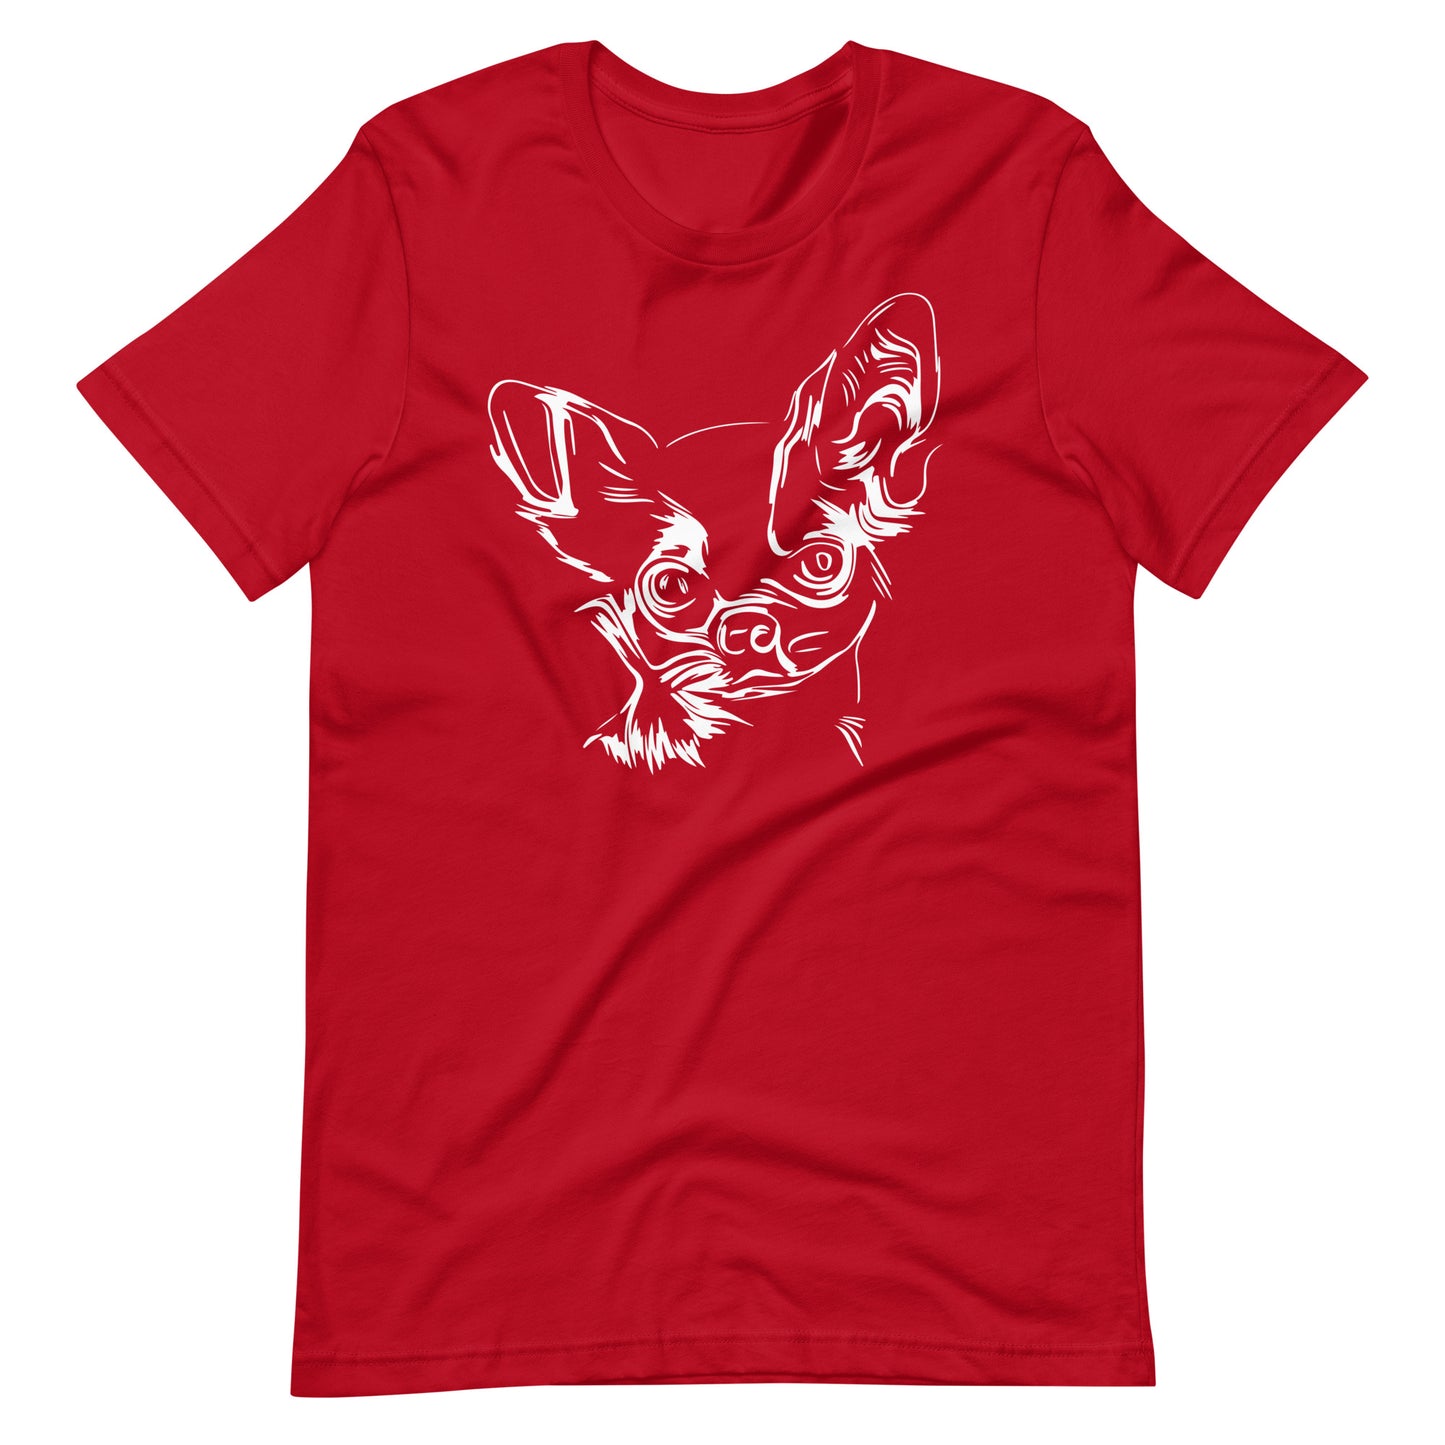 White line Chihuahua face on unisex red t-shirt